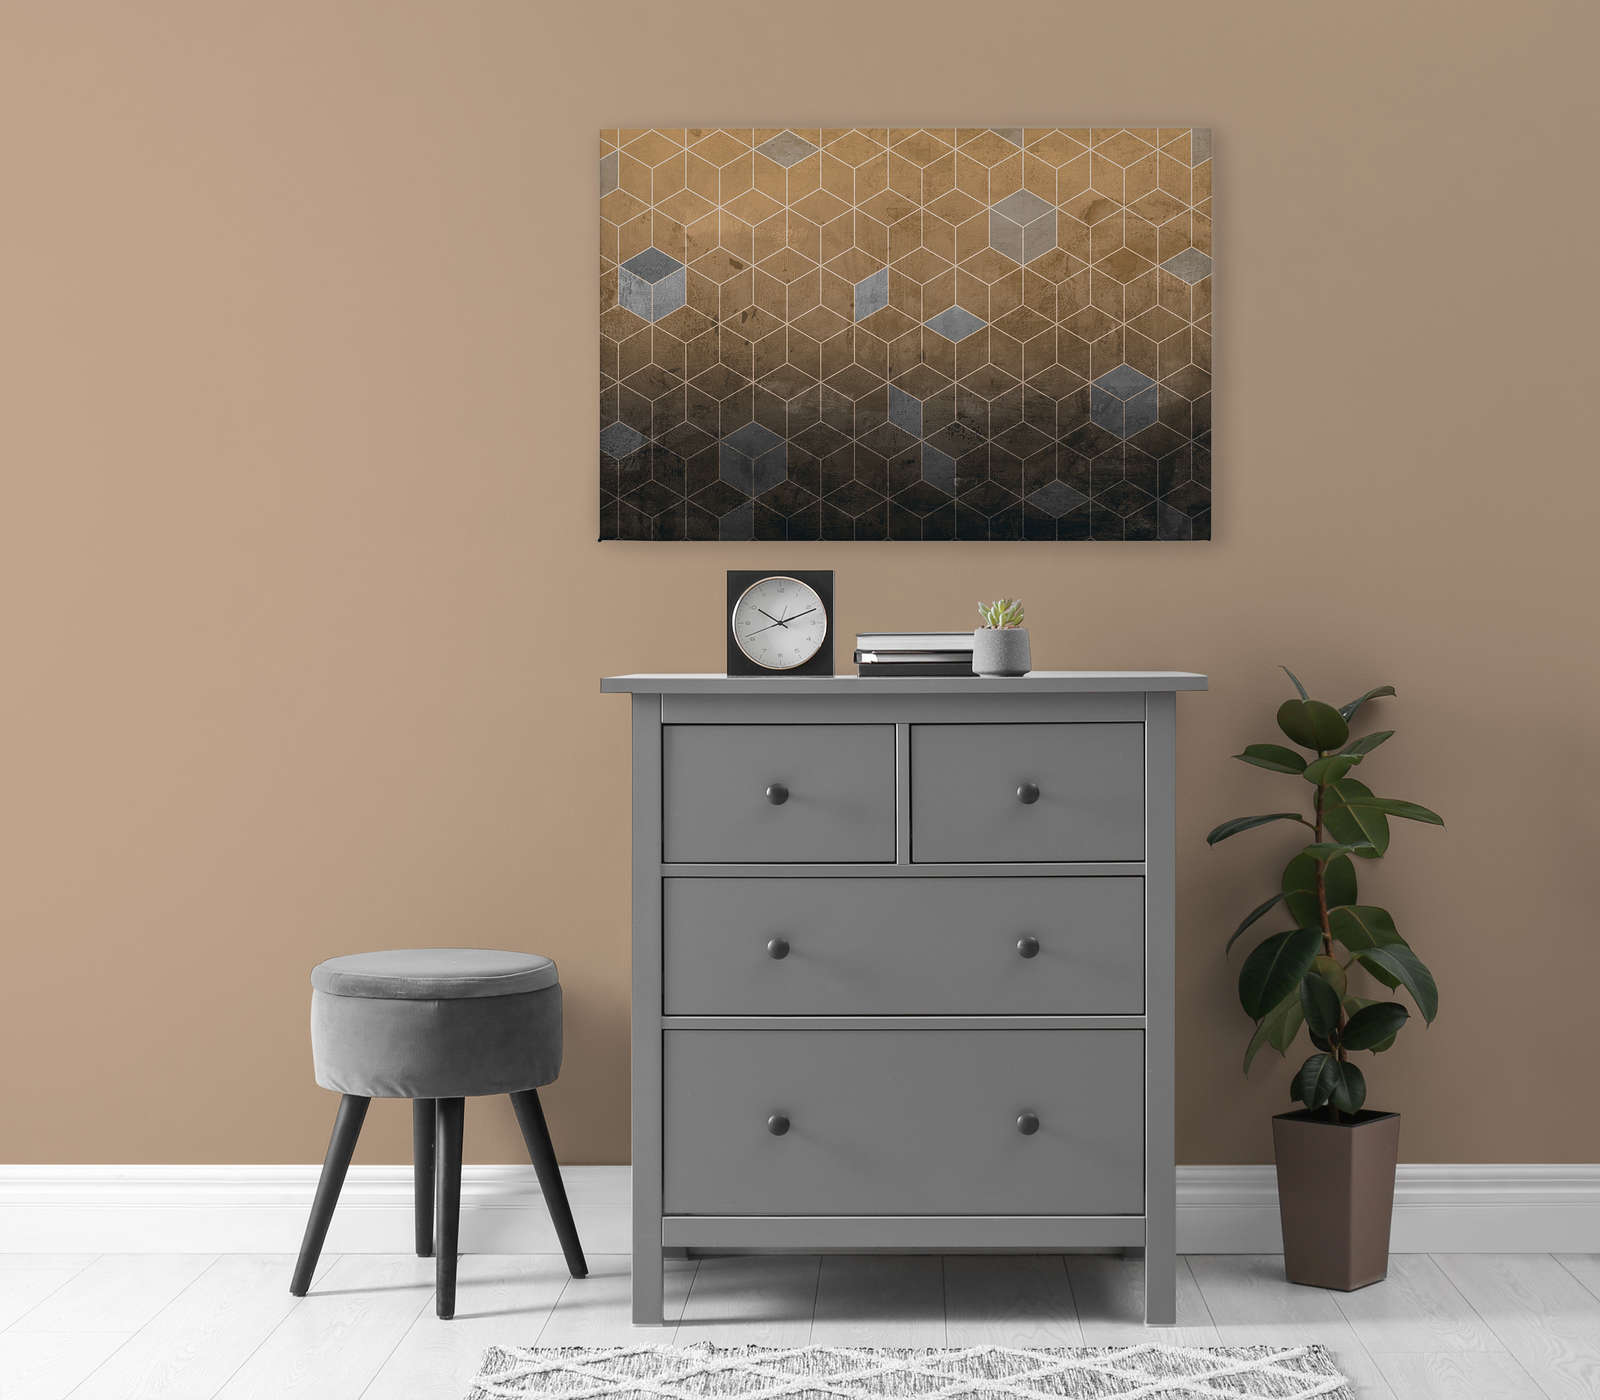             Canvas painting with block pattern in 3D look - 0.90 m x 0.60 m
        